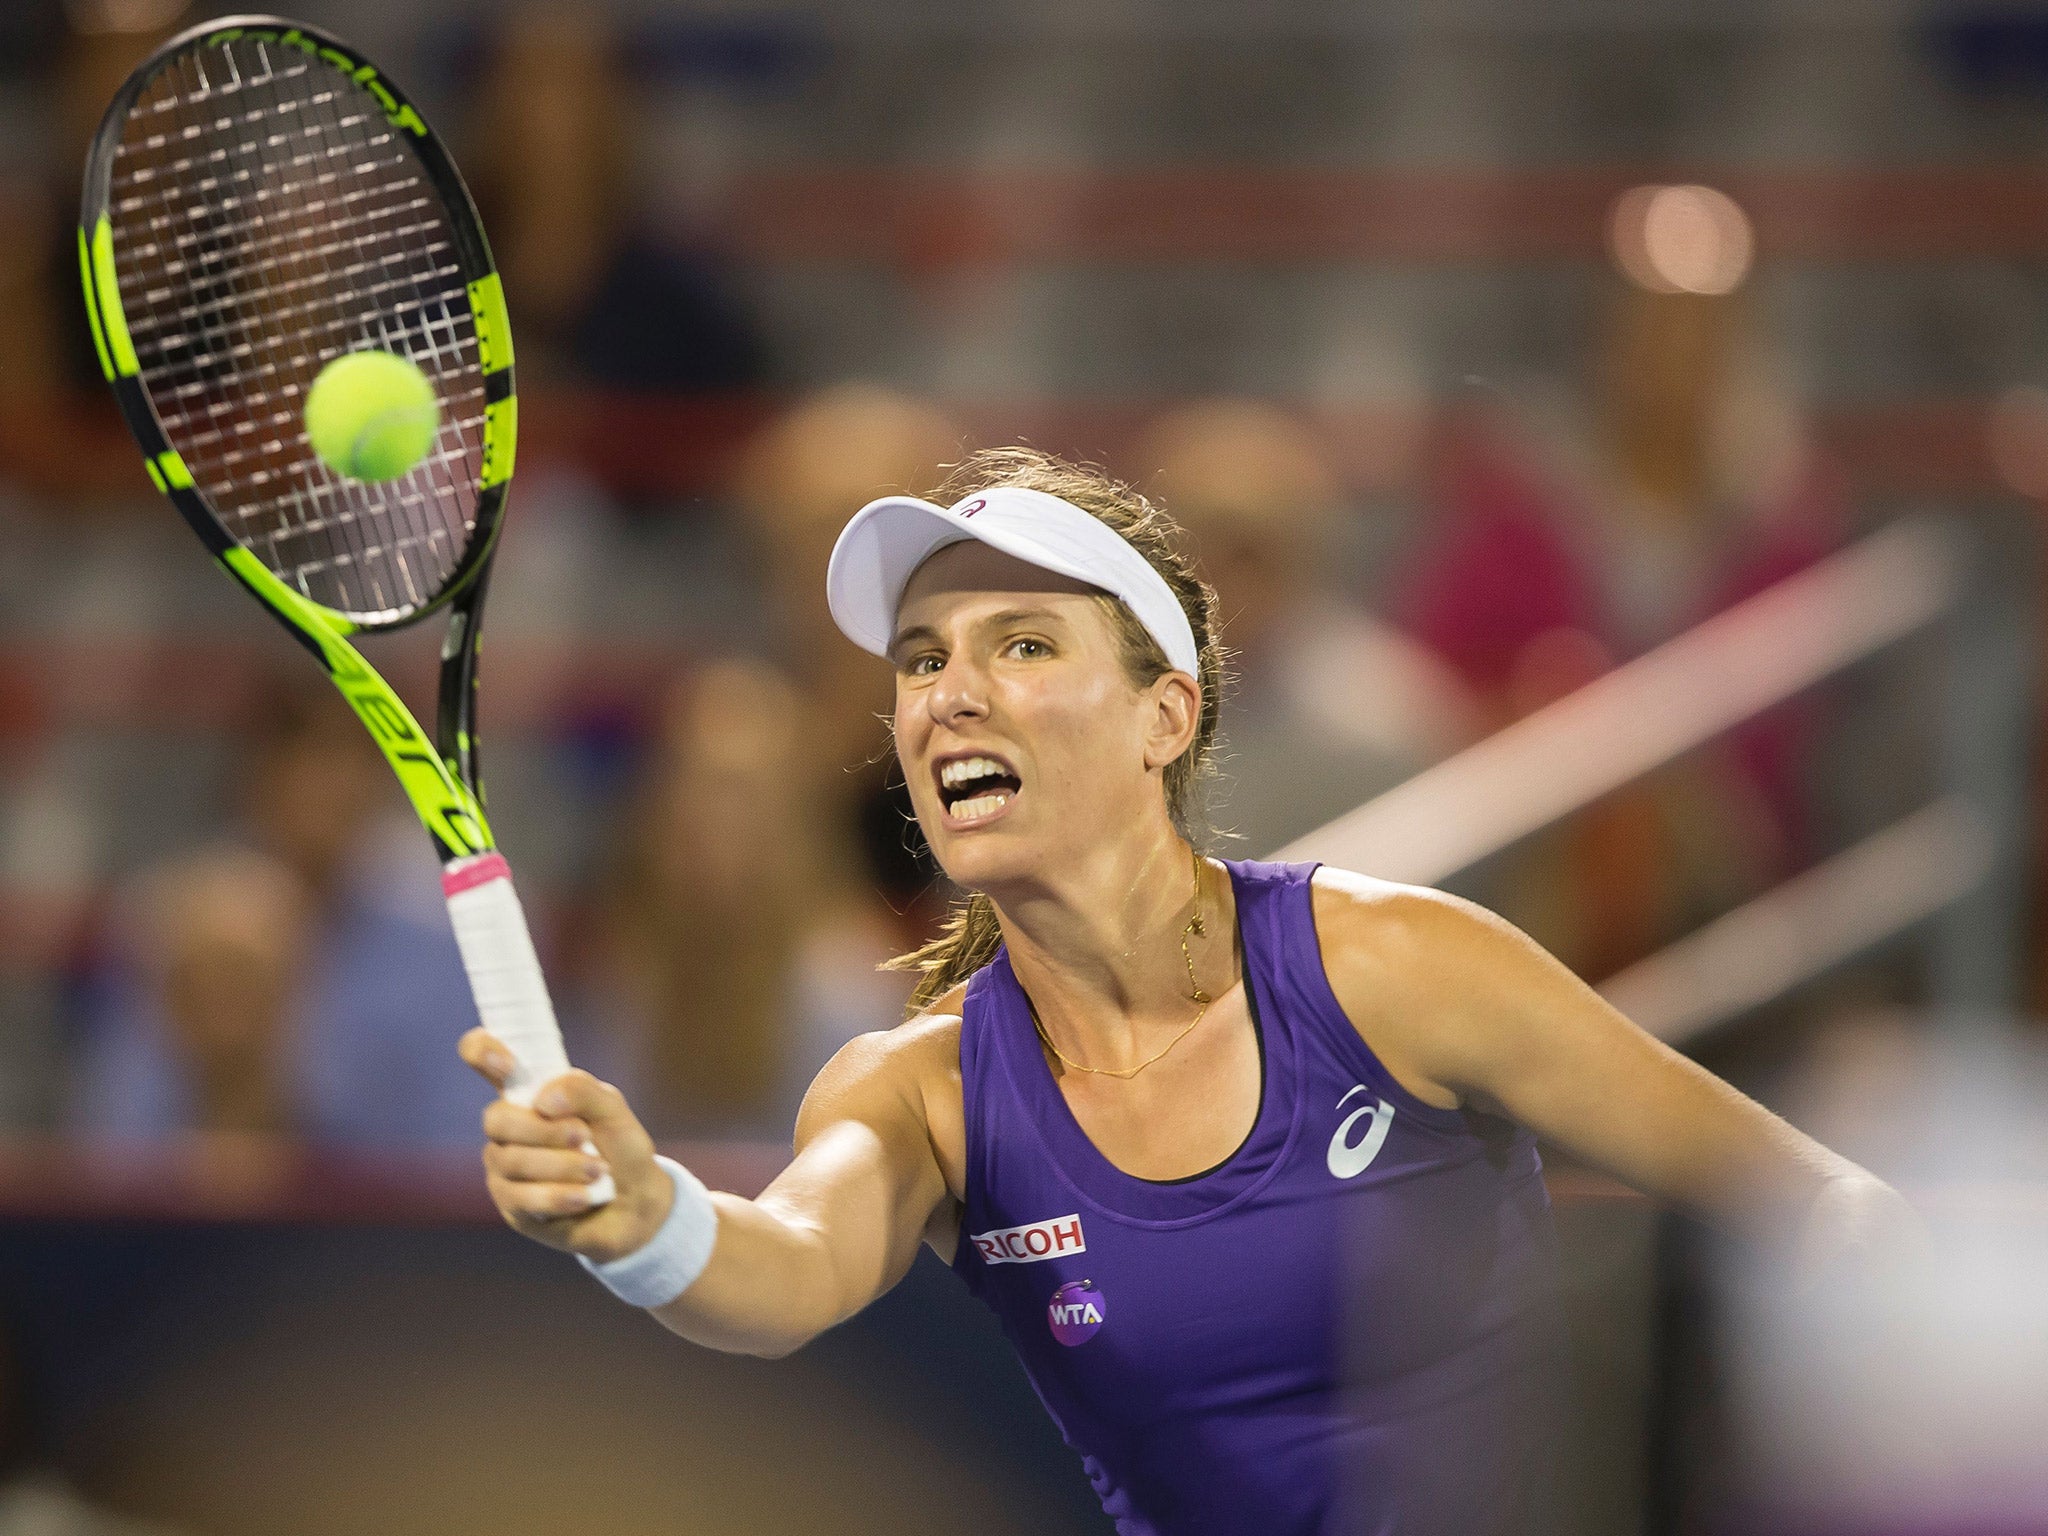 Konta paid the price for too many unforced errors